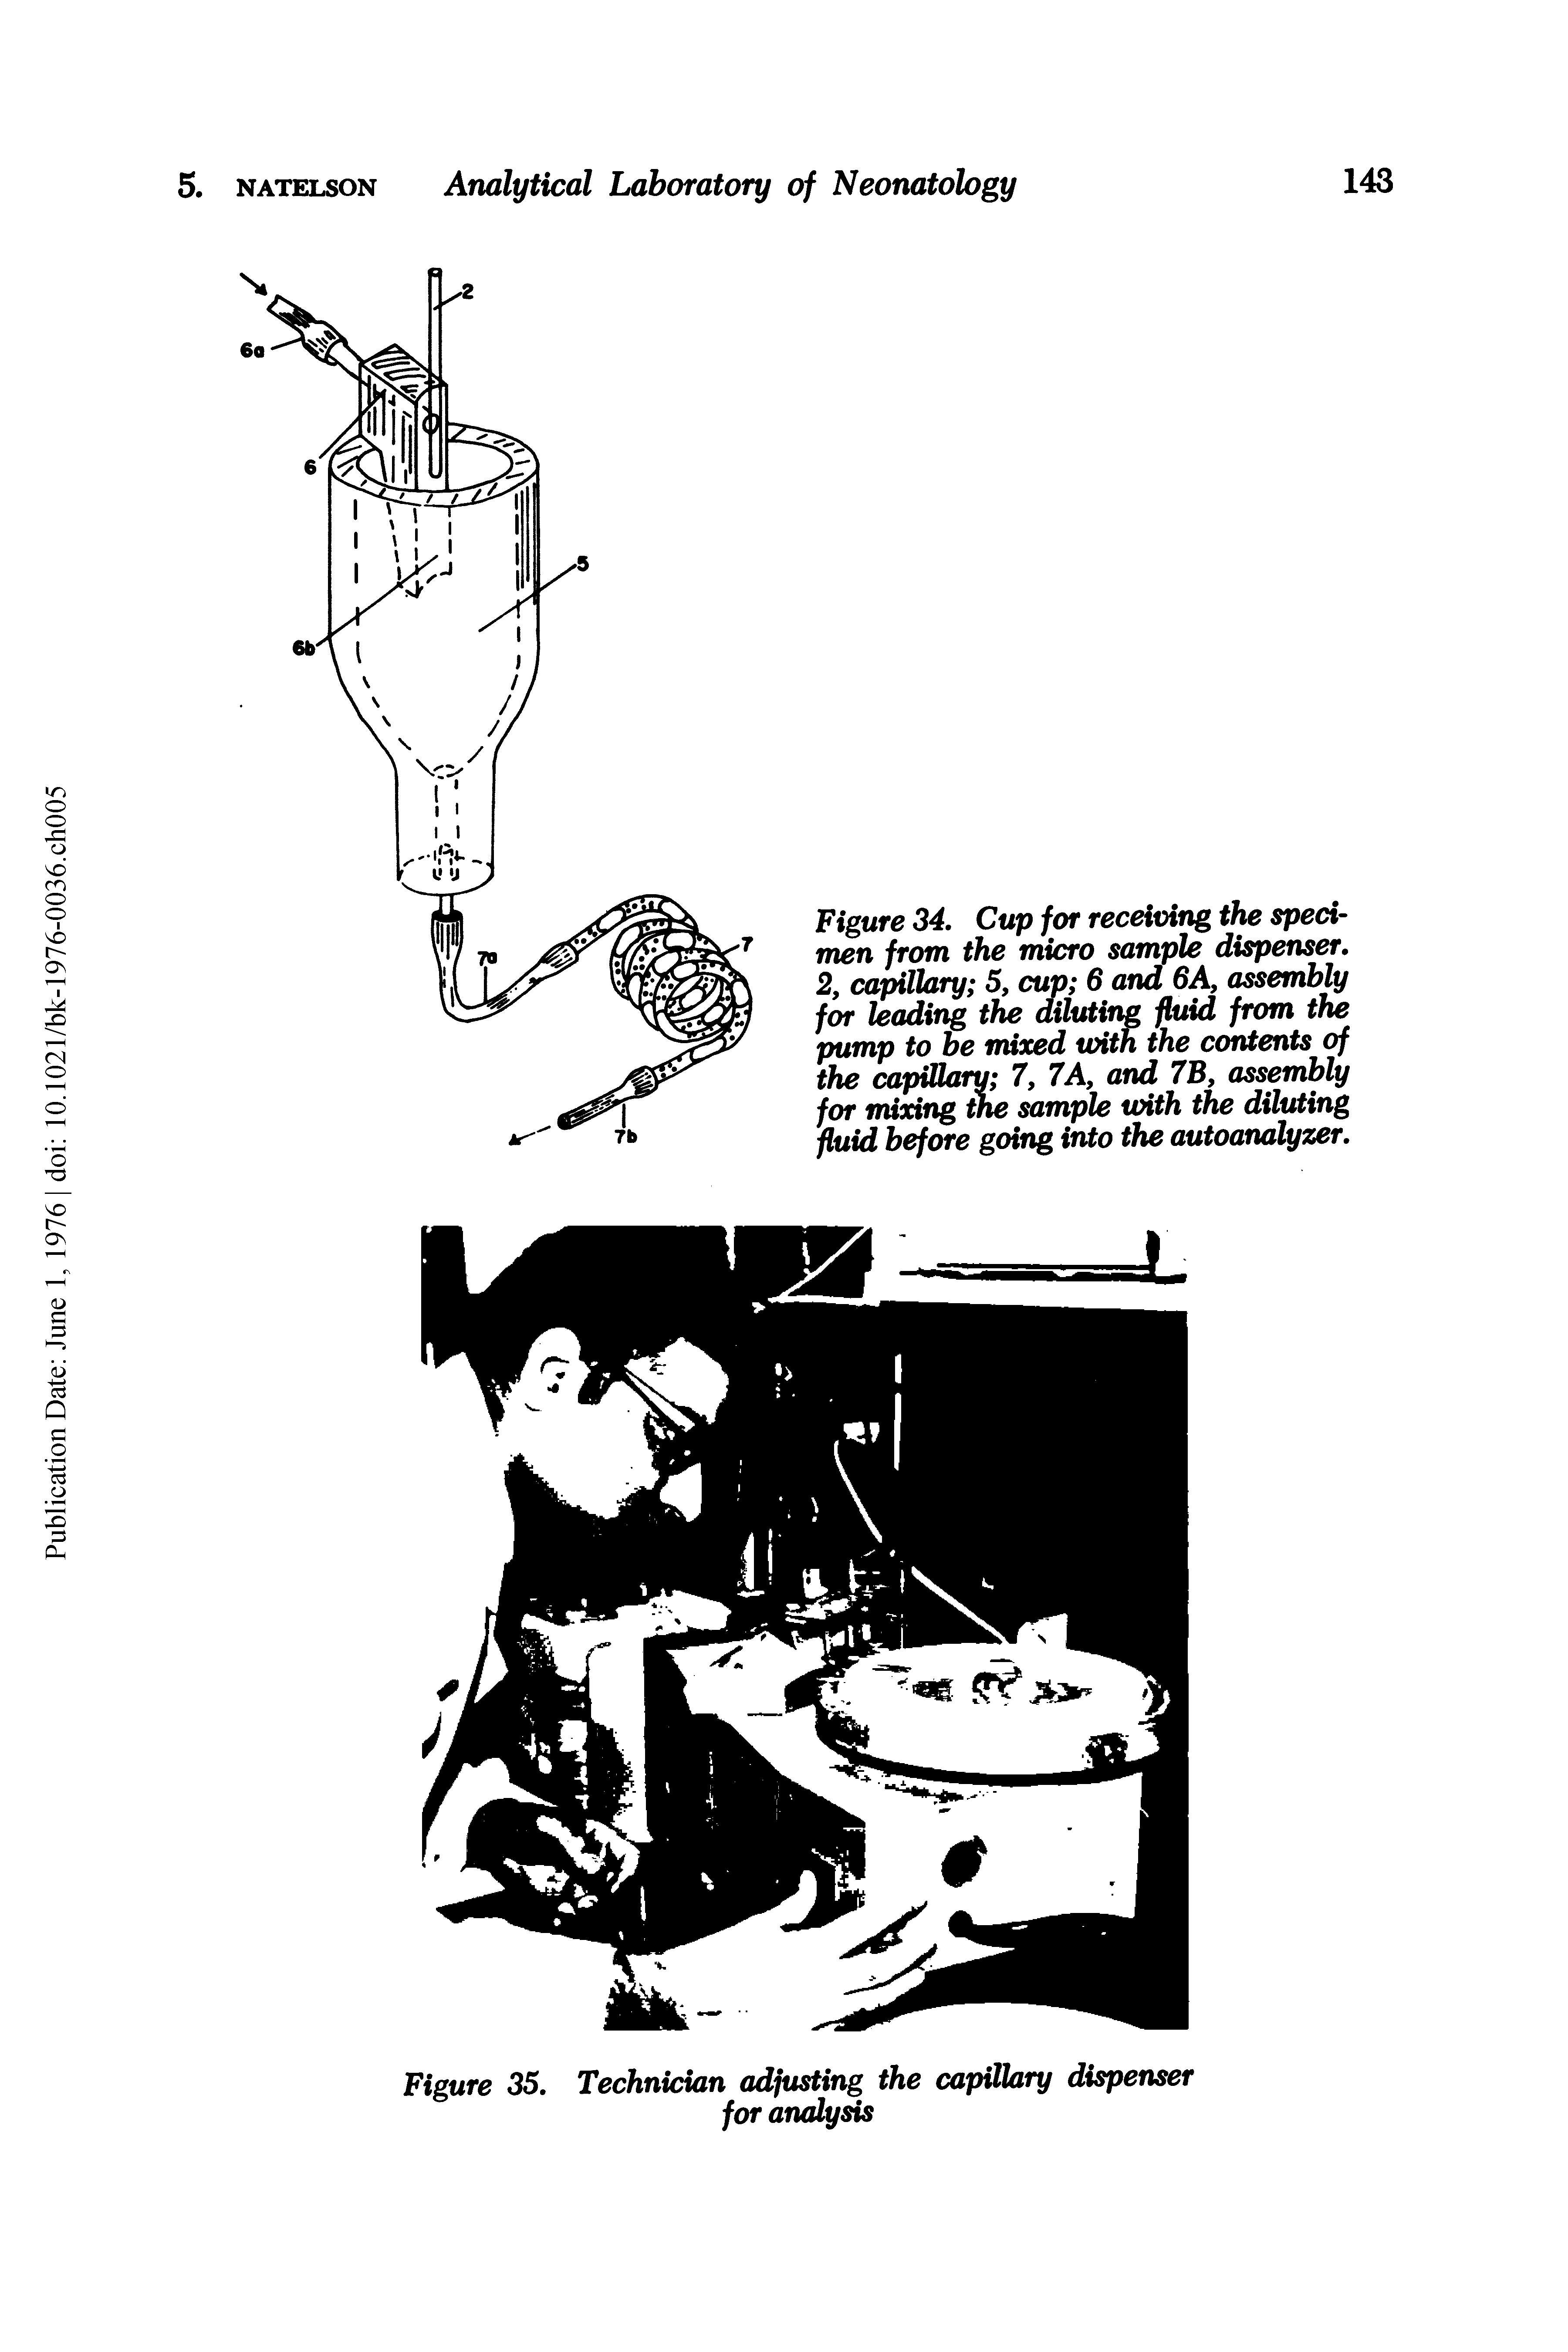 Figure 34, Cup for receiving the specimen from the micro sample dispenser, 2, capillary 5, cup 6 and 6A, assembly for leading the diluting fluid from the pump to be mixed with the contents of the capillary 7, 7A, and 7B, assembly for mixing the sample with the diluting fluid before going into the autoanalyzer.